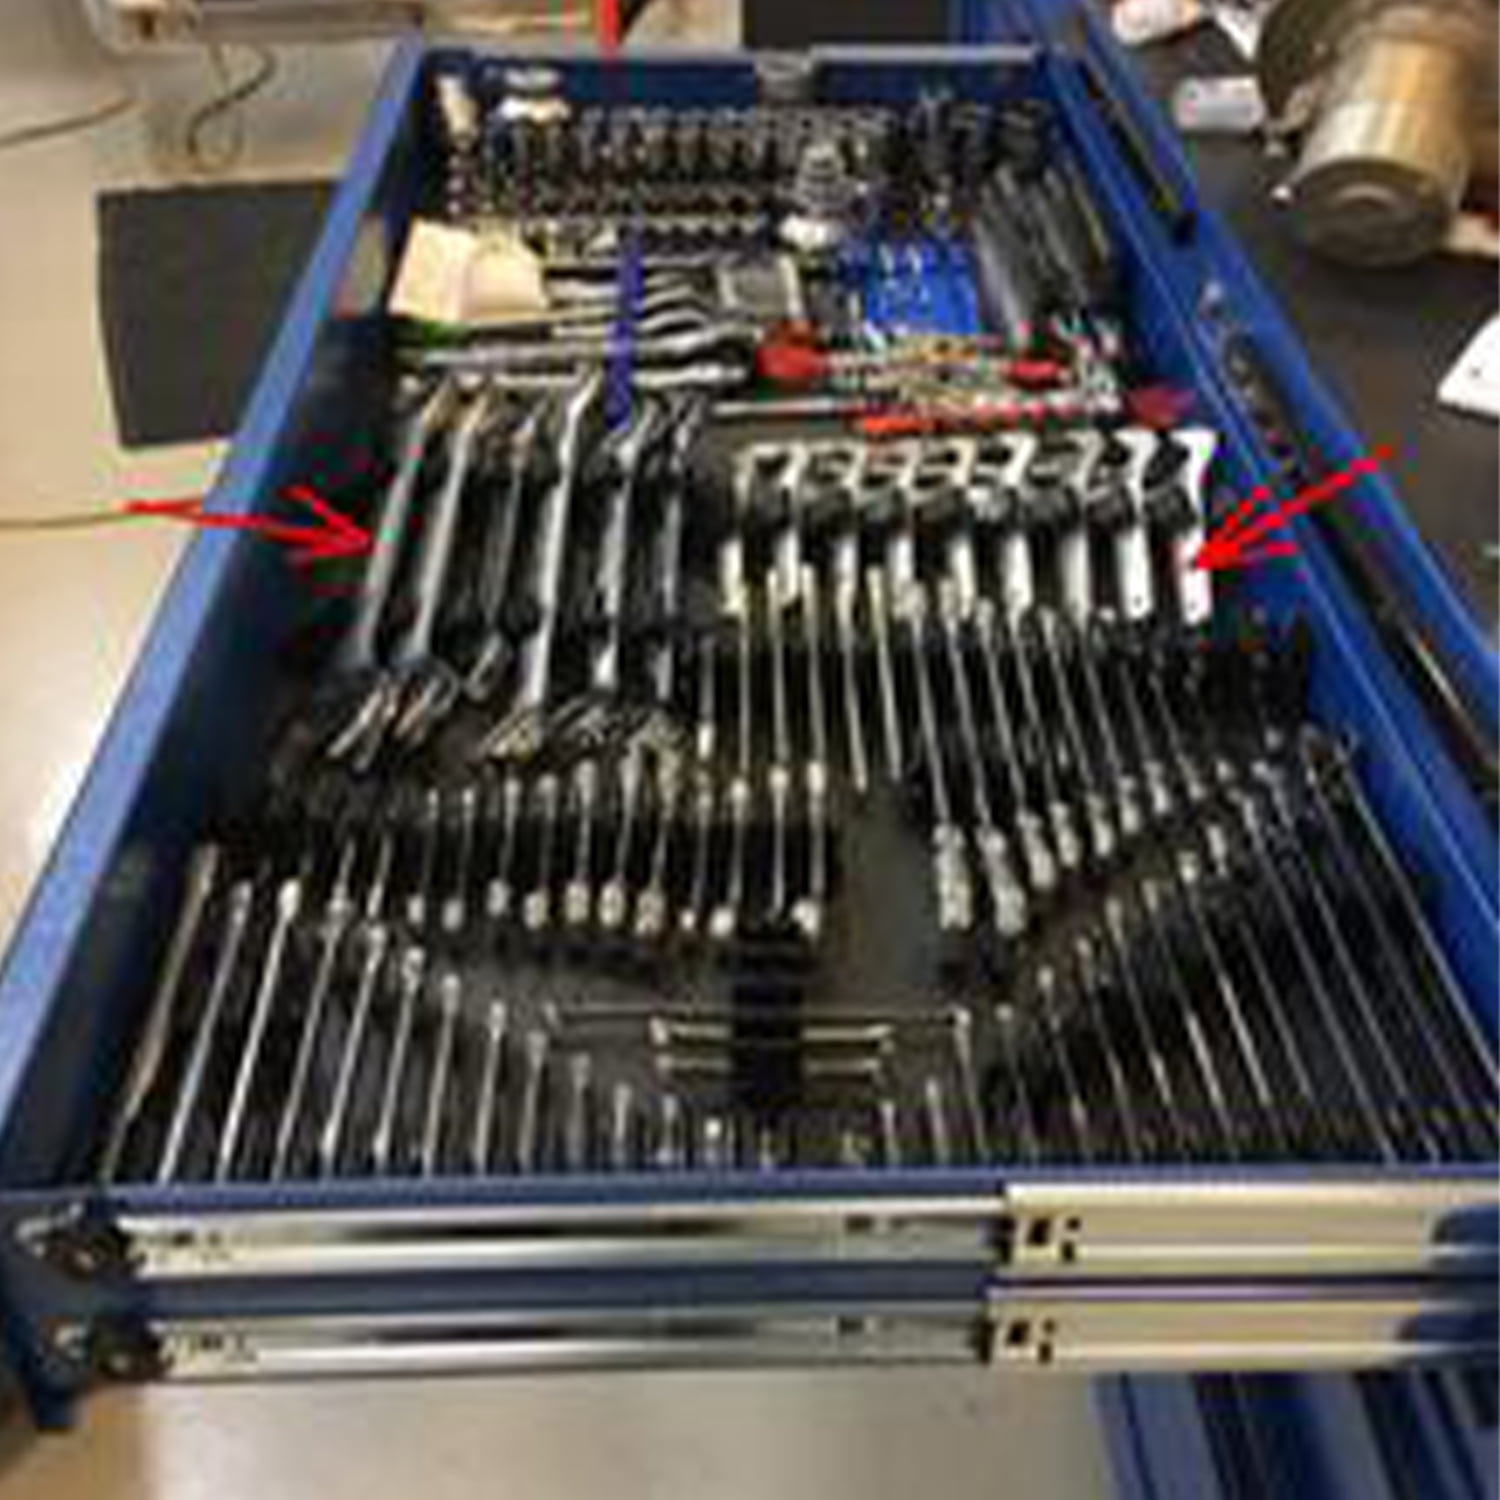 Toolbox Widget TBW-AW10 Holds 10 Angle Wrench Organizer Kit 